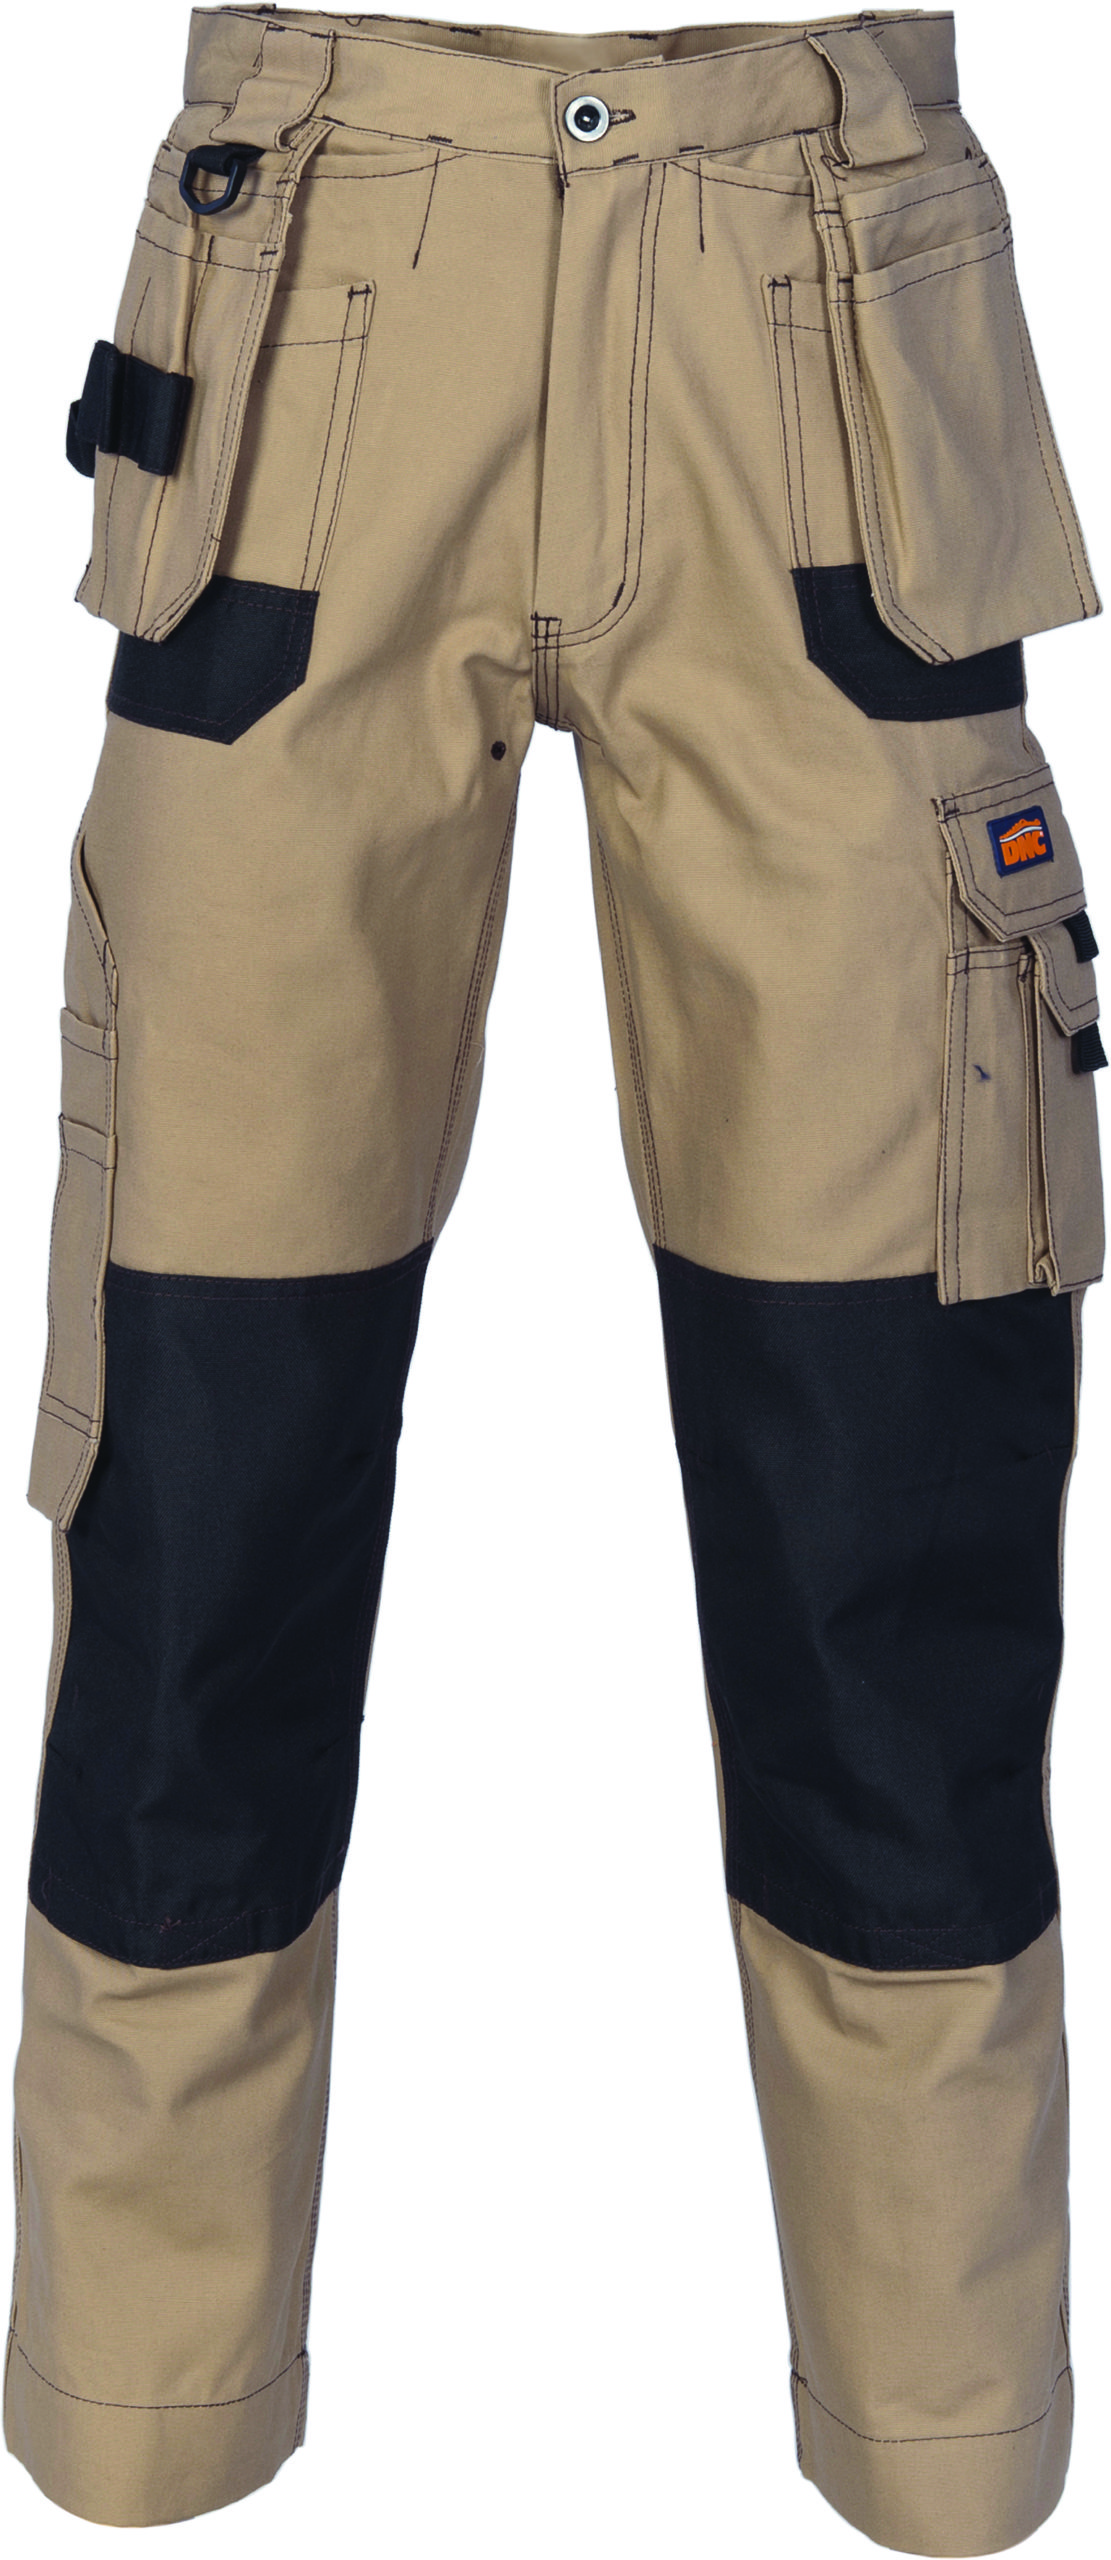 DNC Duratex Cotton Duck Weave Tradies Cargo Pants with tool pocket